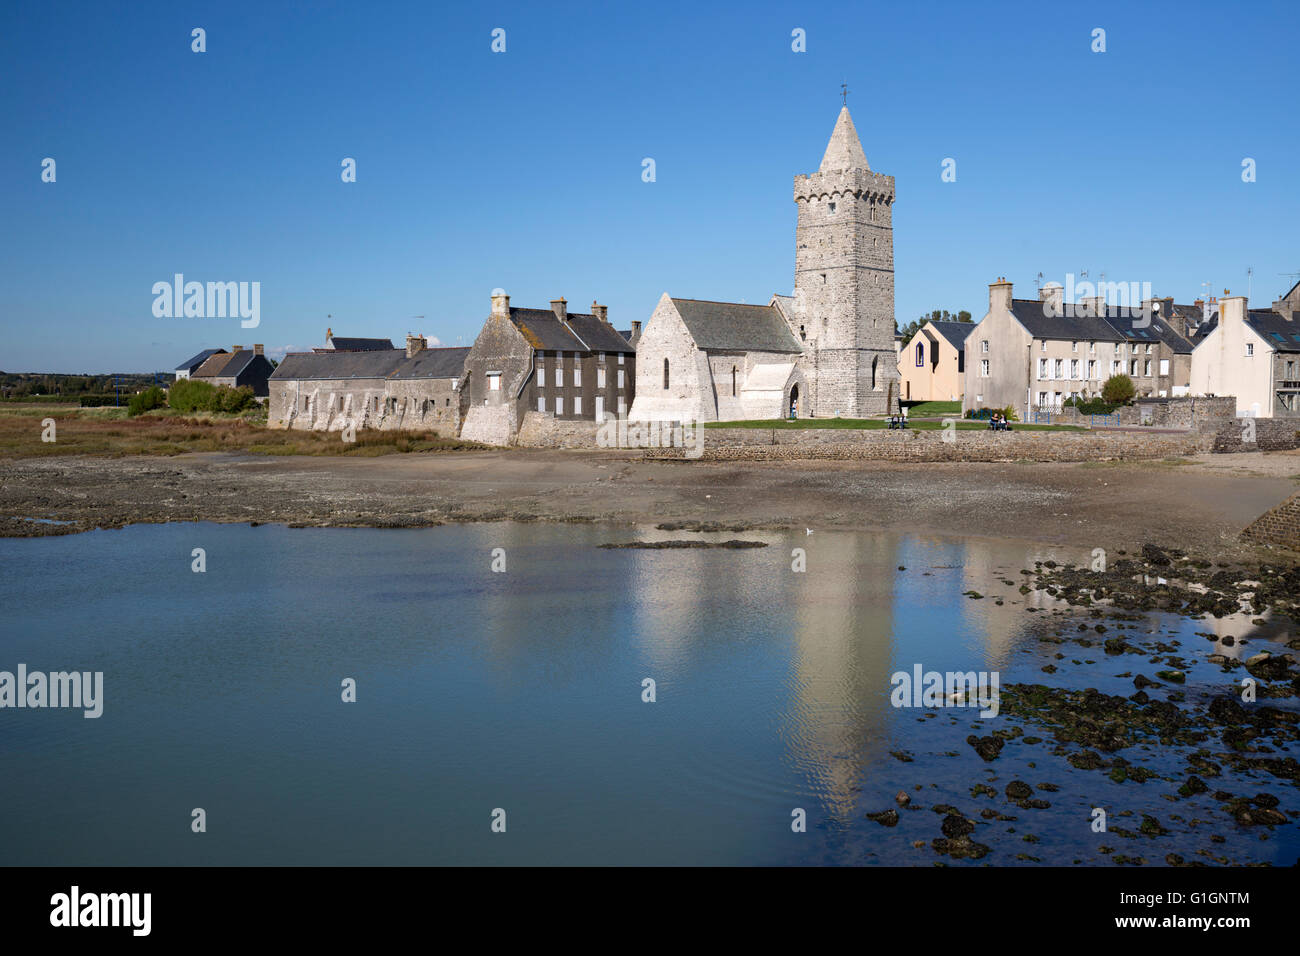 View of church and lagoon of channel coast town, Portbail, Normandy, France, Europe Stock Photo